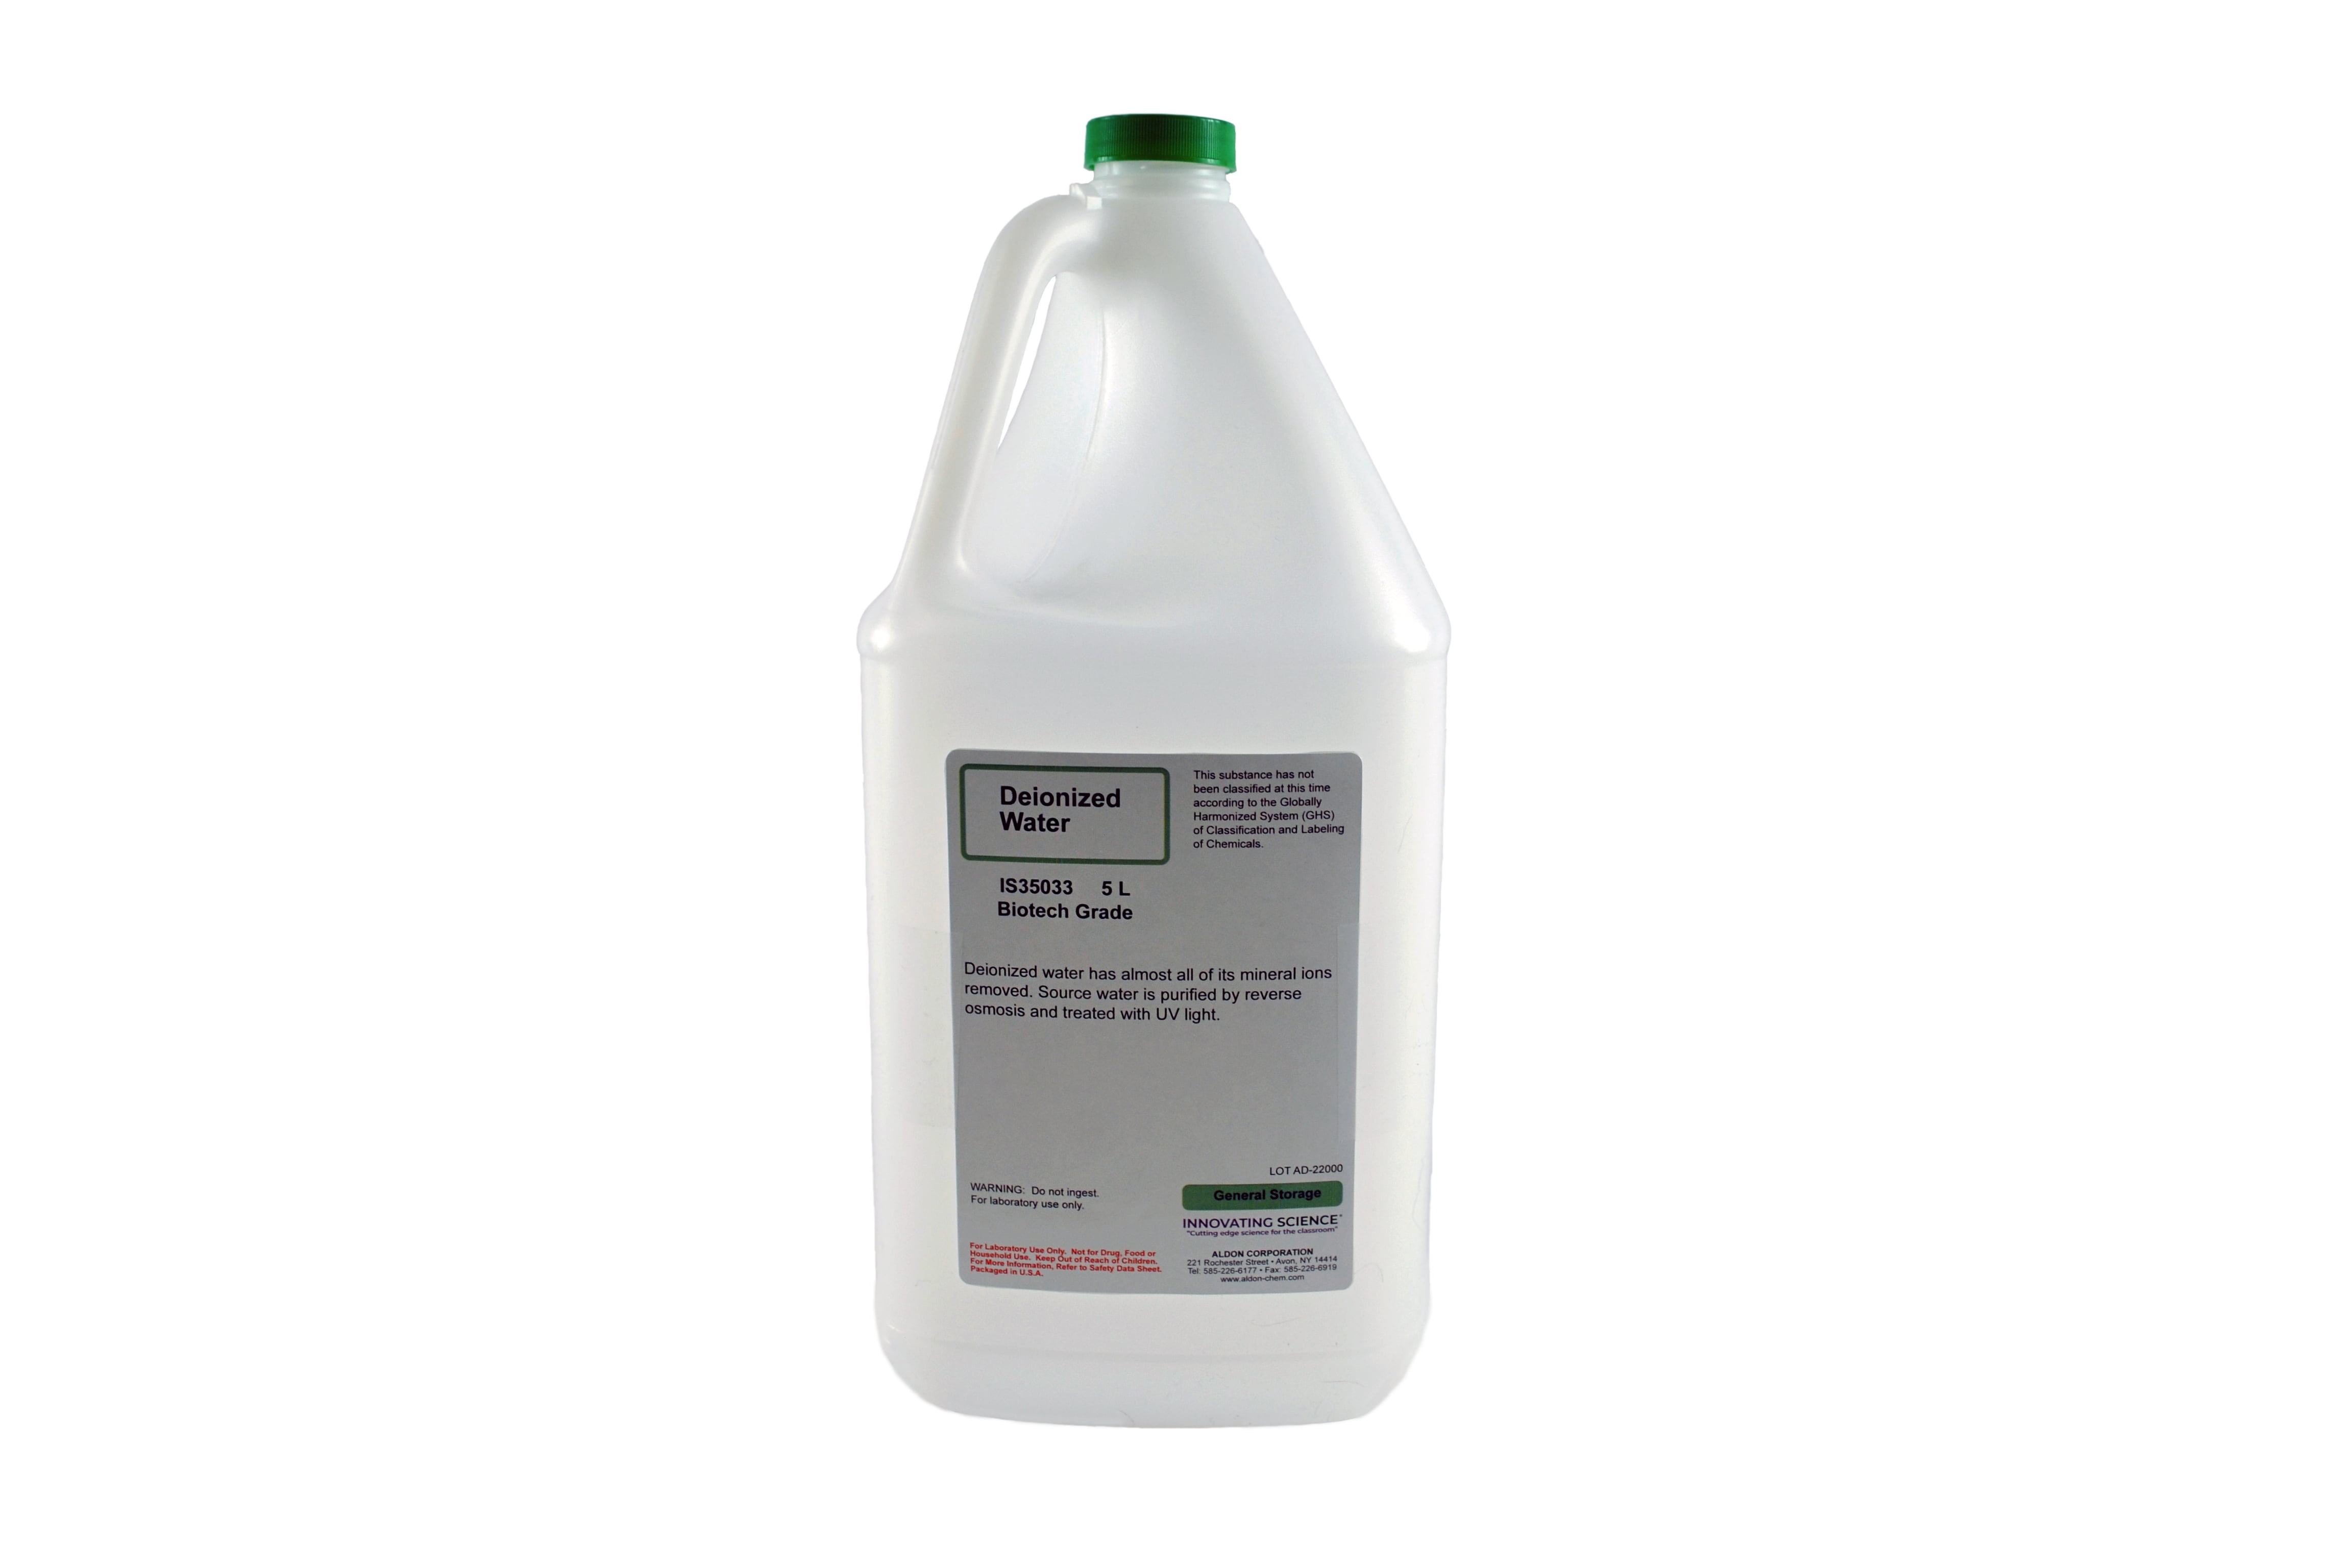 Deionized Water, 5000mL (5L) - Biotechnology (Reagent) Grade -  Demineralized - The Curated Chemical Collection by Innovating Science